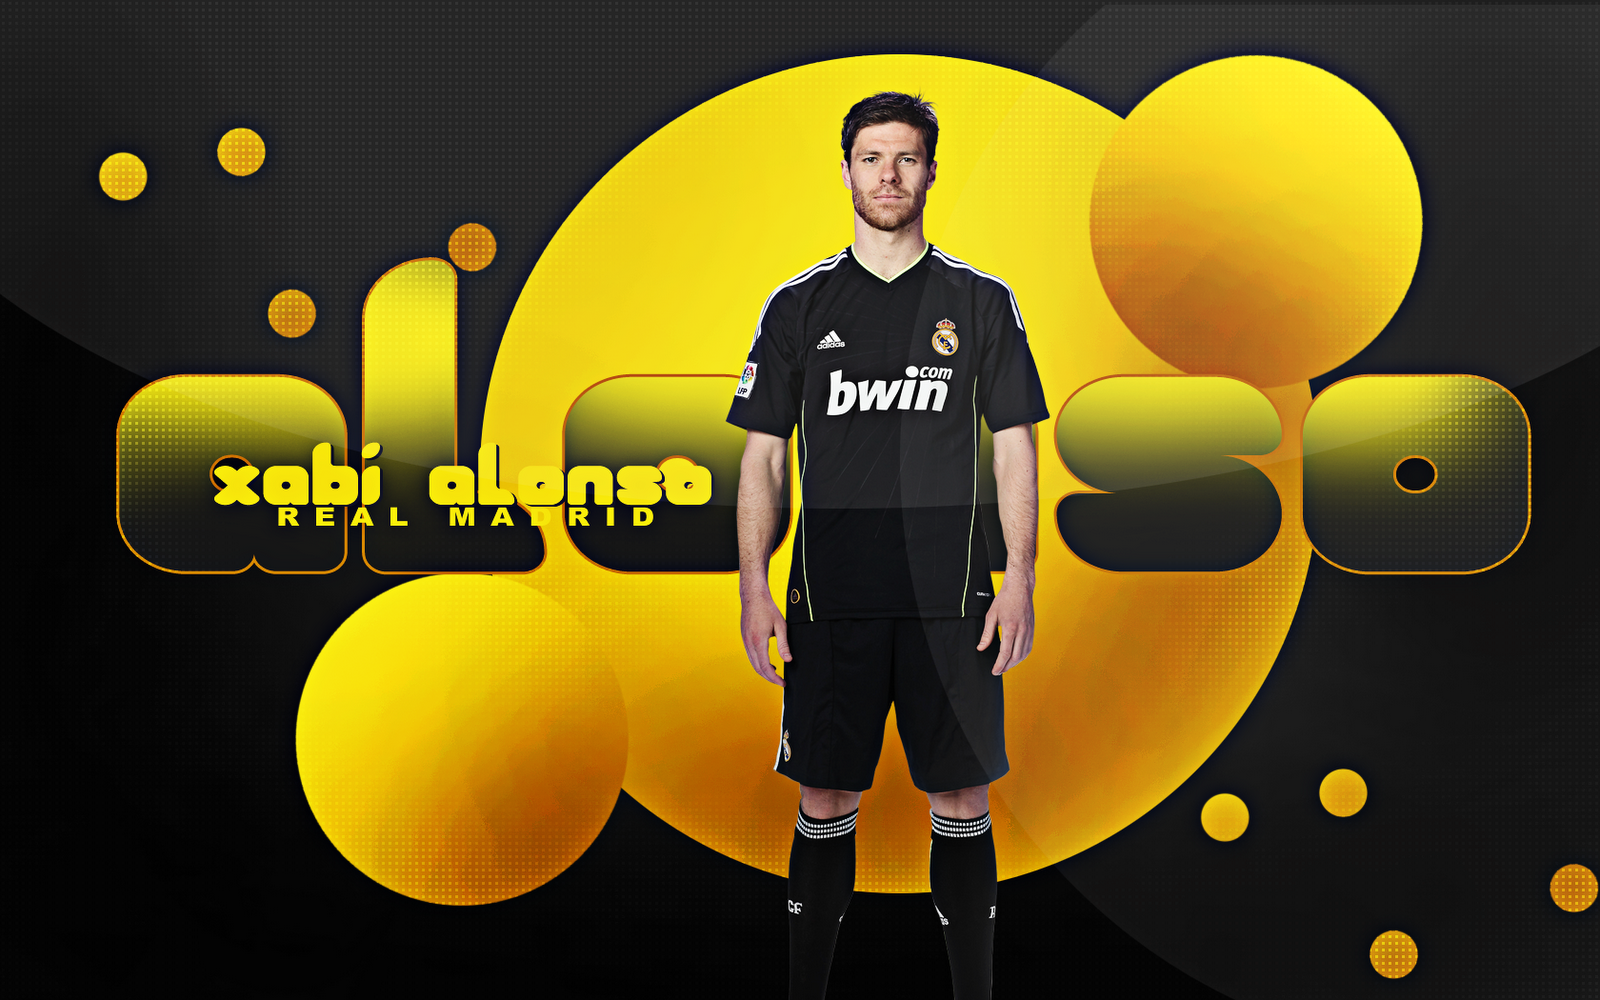 Xabi Alonso Wallpaper Image HD Image For Pc